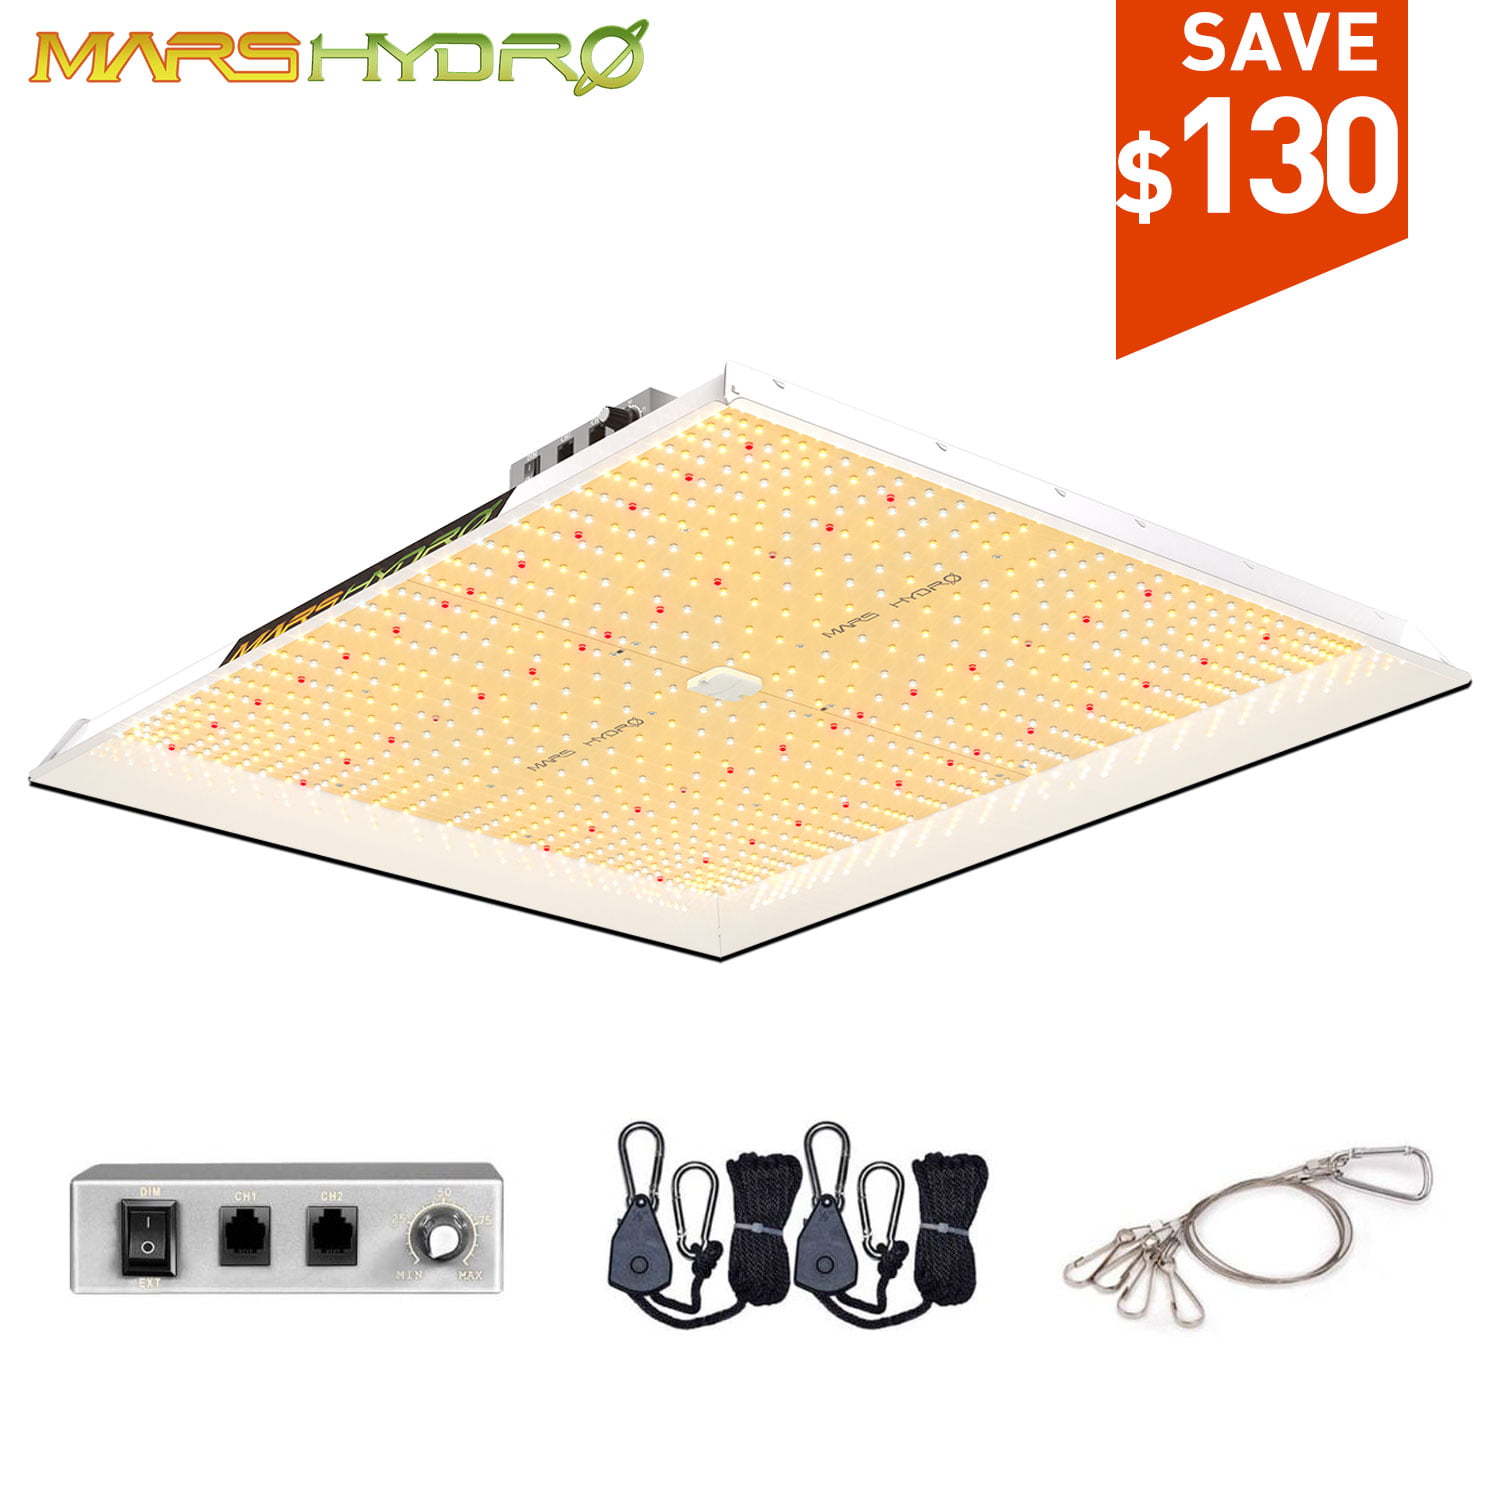 MARS HYDRO SP 150 Led Grow Light Sunlike Full Spectrum Grow Lamps for Indoor Plants Veg and Flower Bloom Hydroponic LED Growing Lights Fixtures for Greenhouse 2ft Four for 4x4 Coverage 